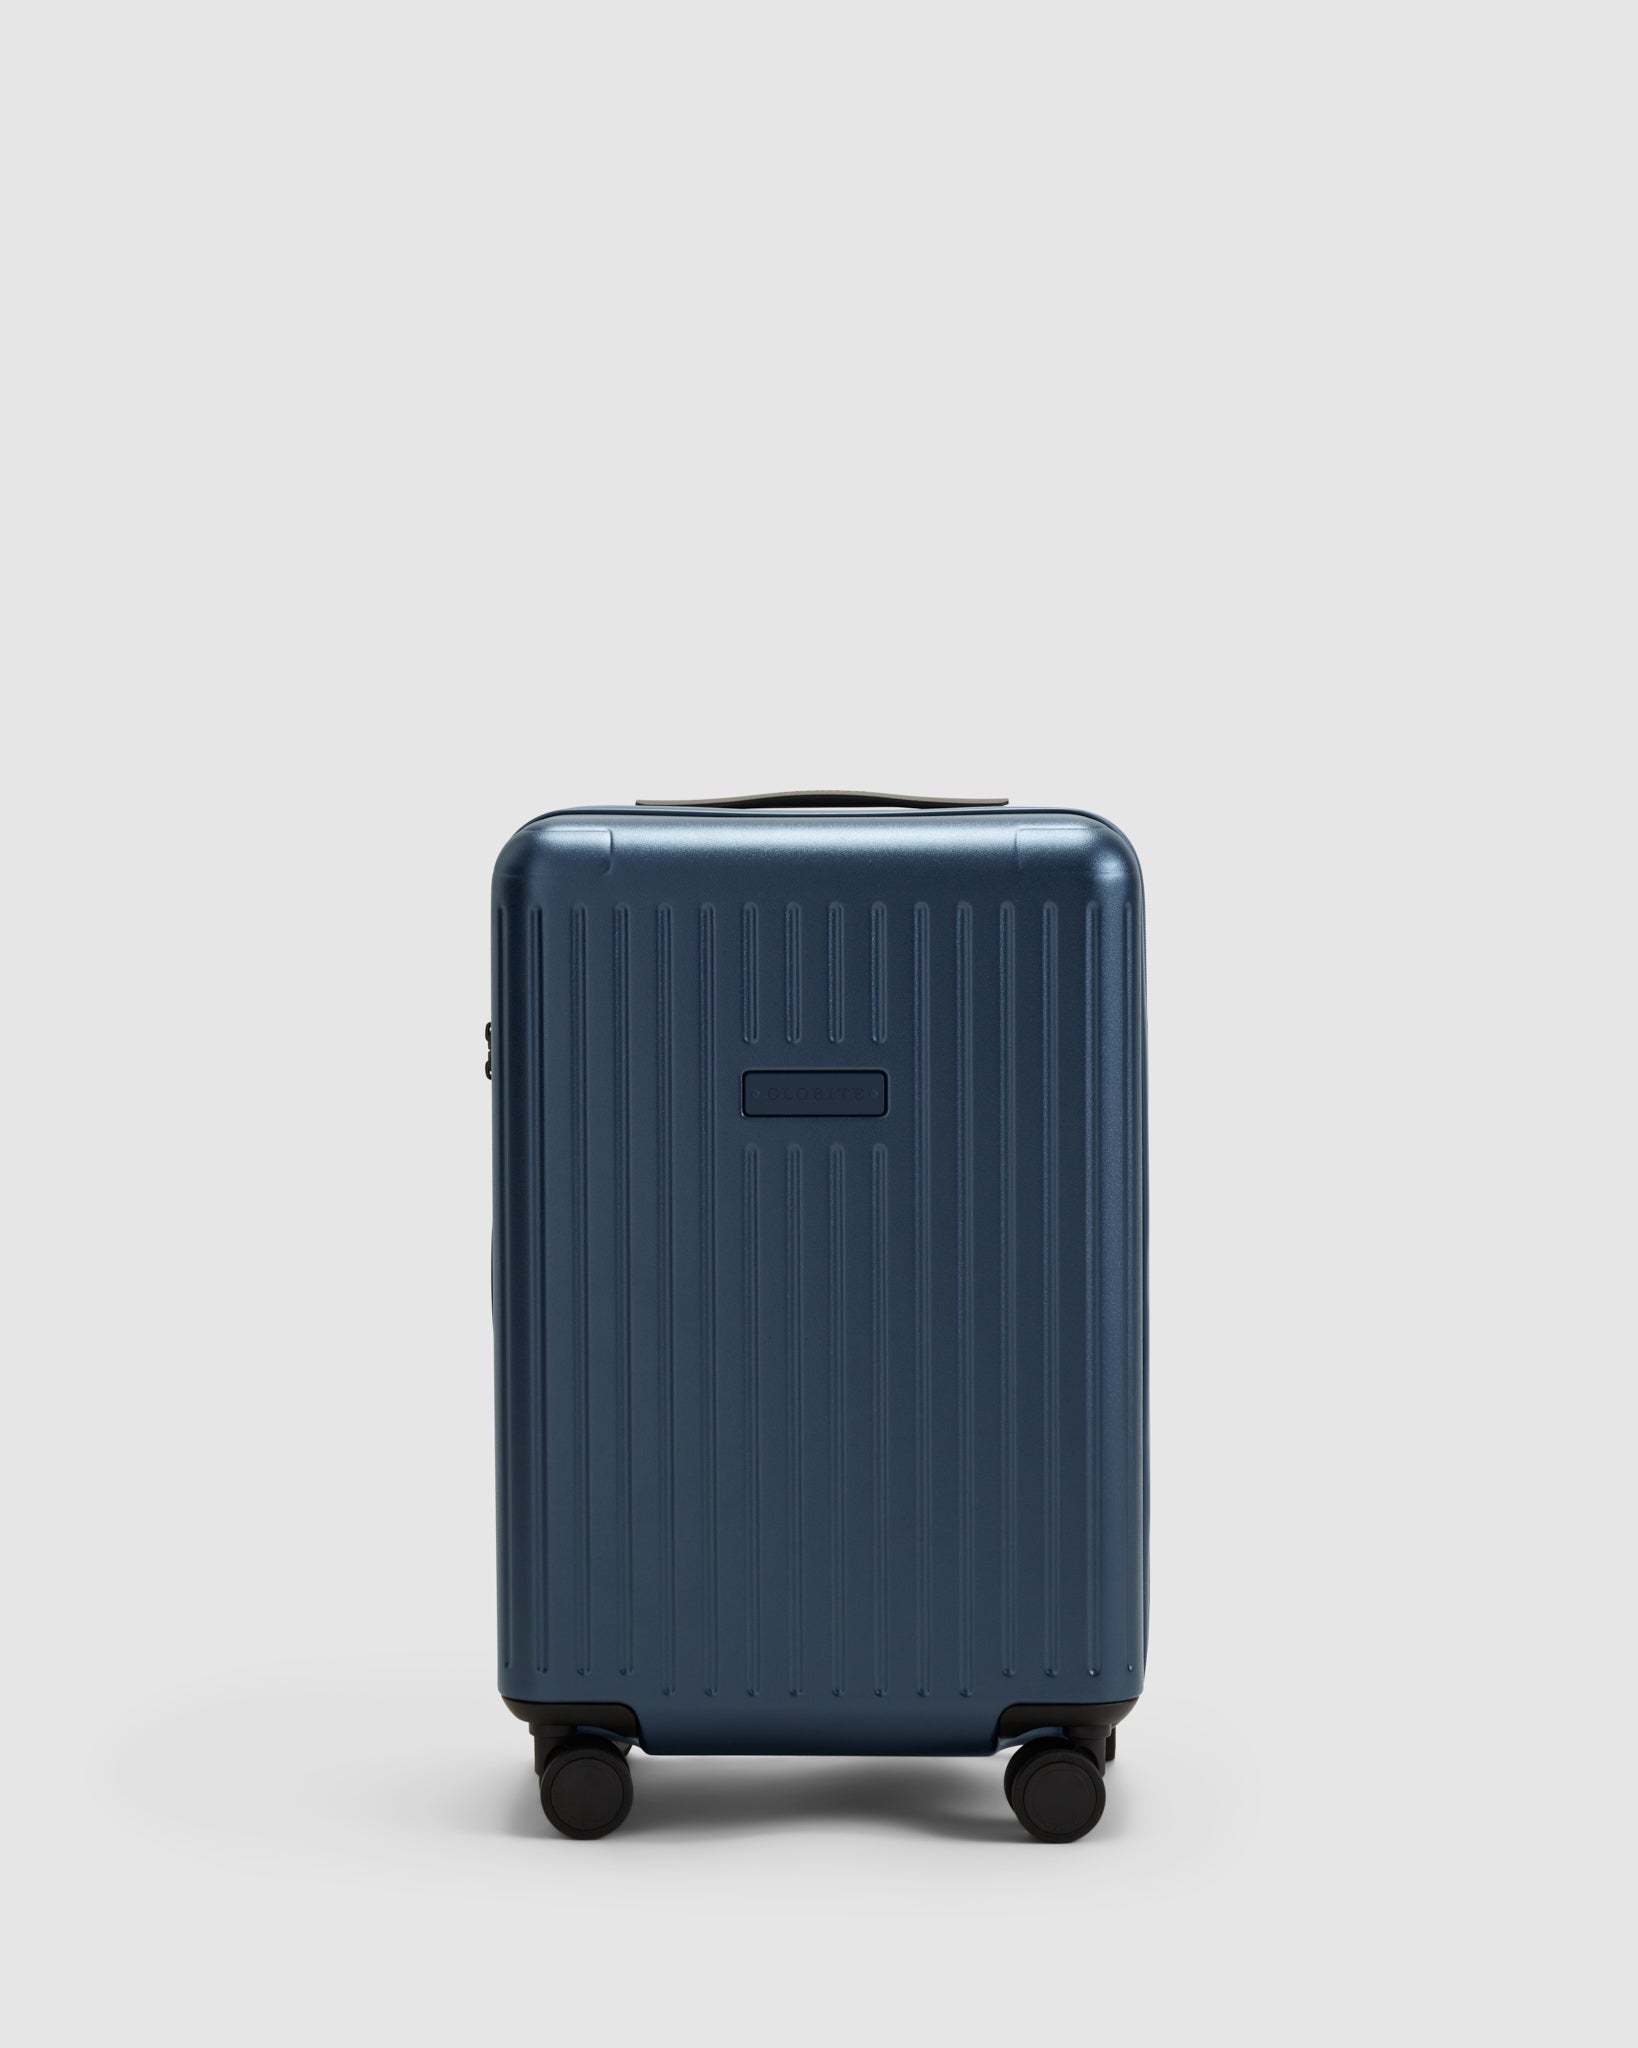 Journey Carry On Luggage - Moonlit Ocean